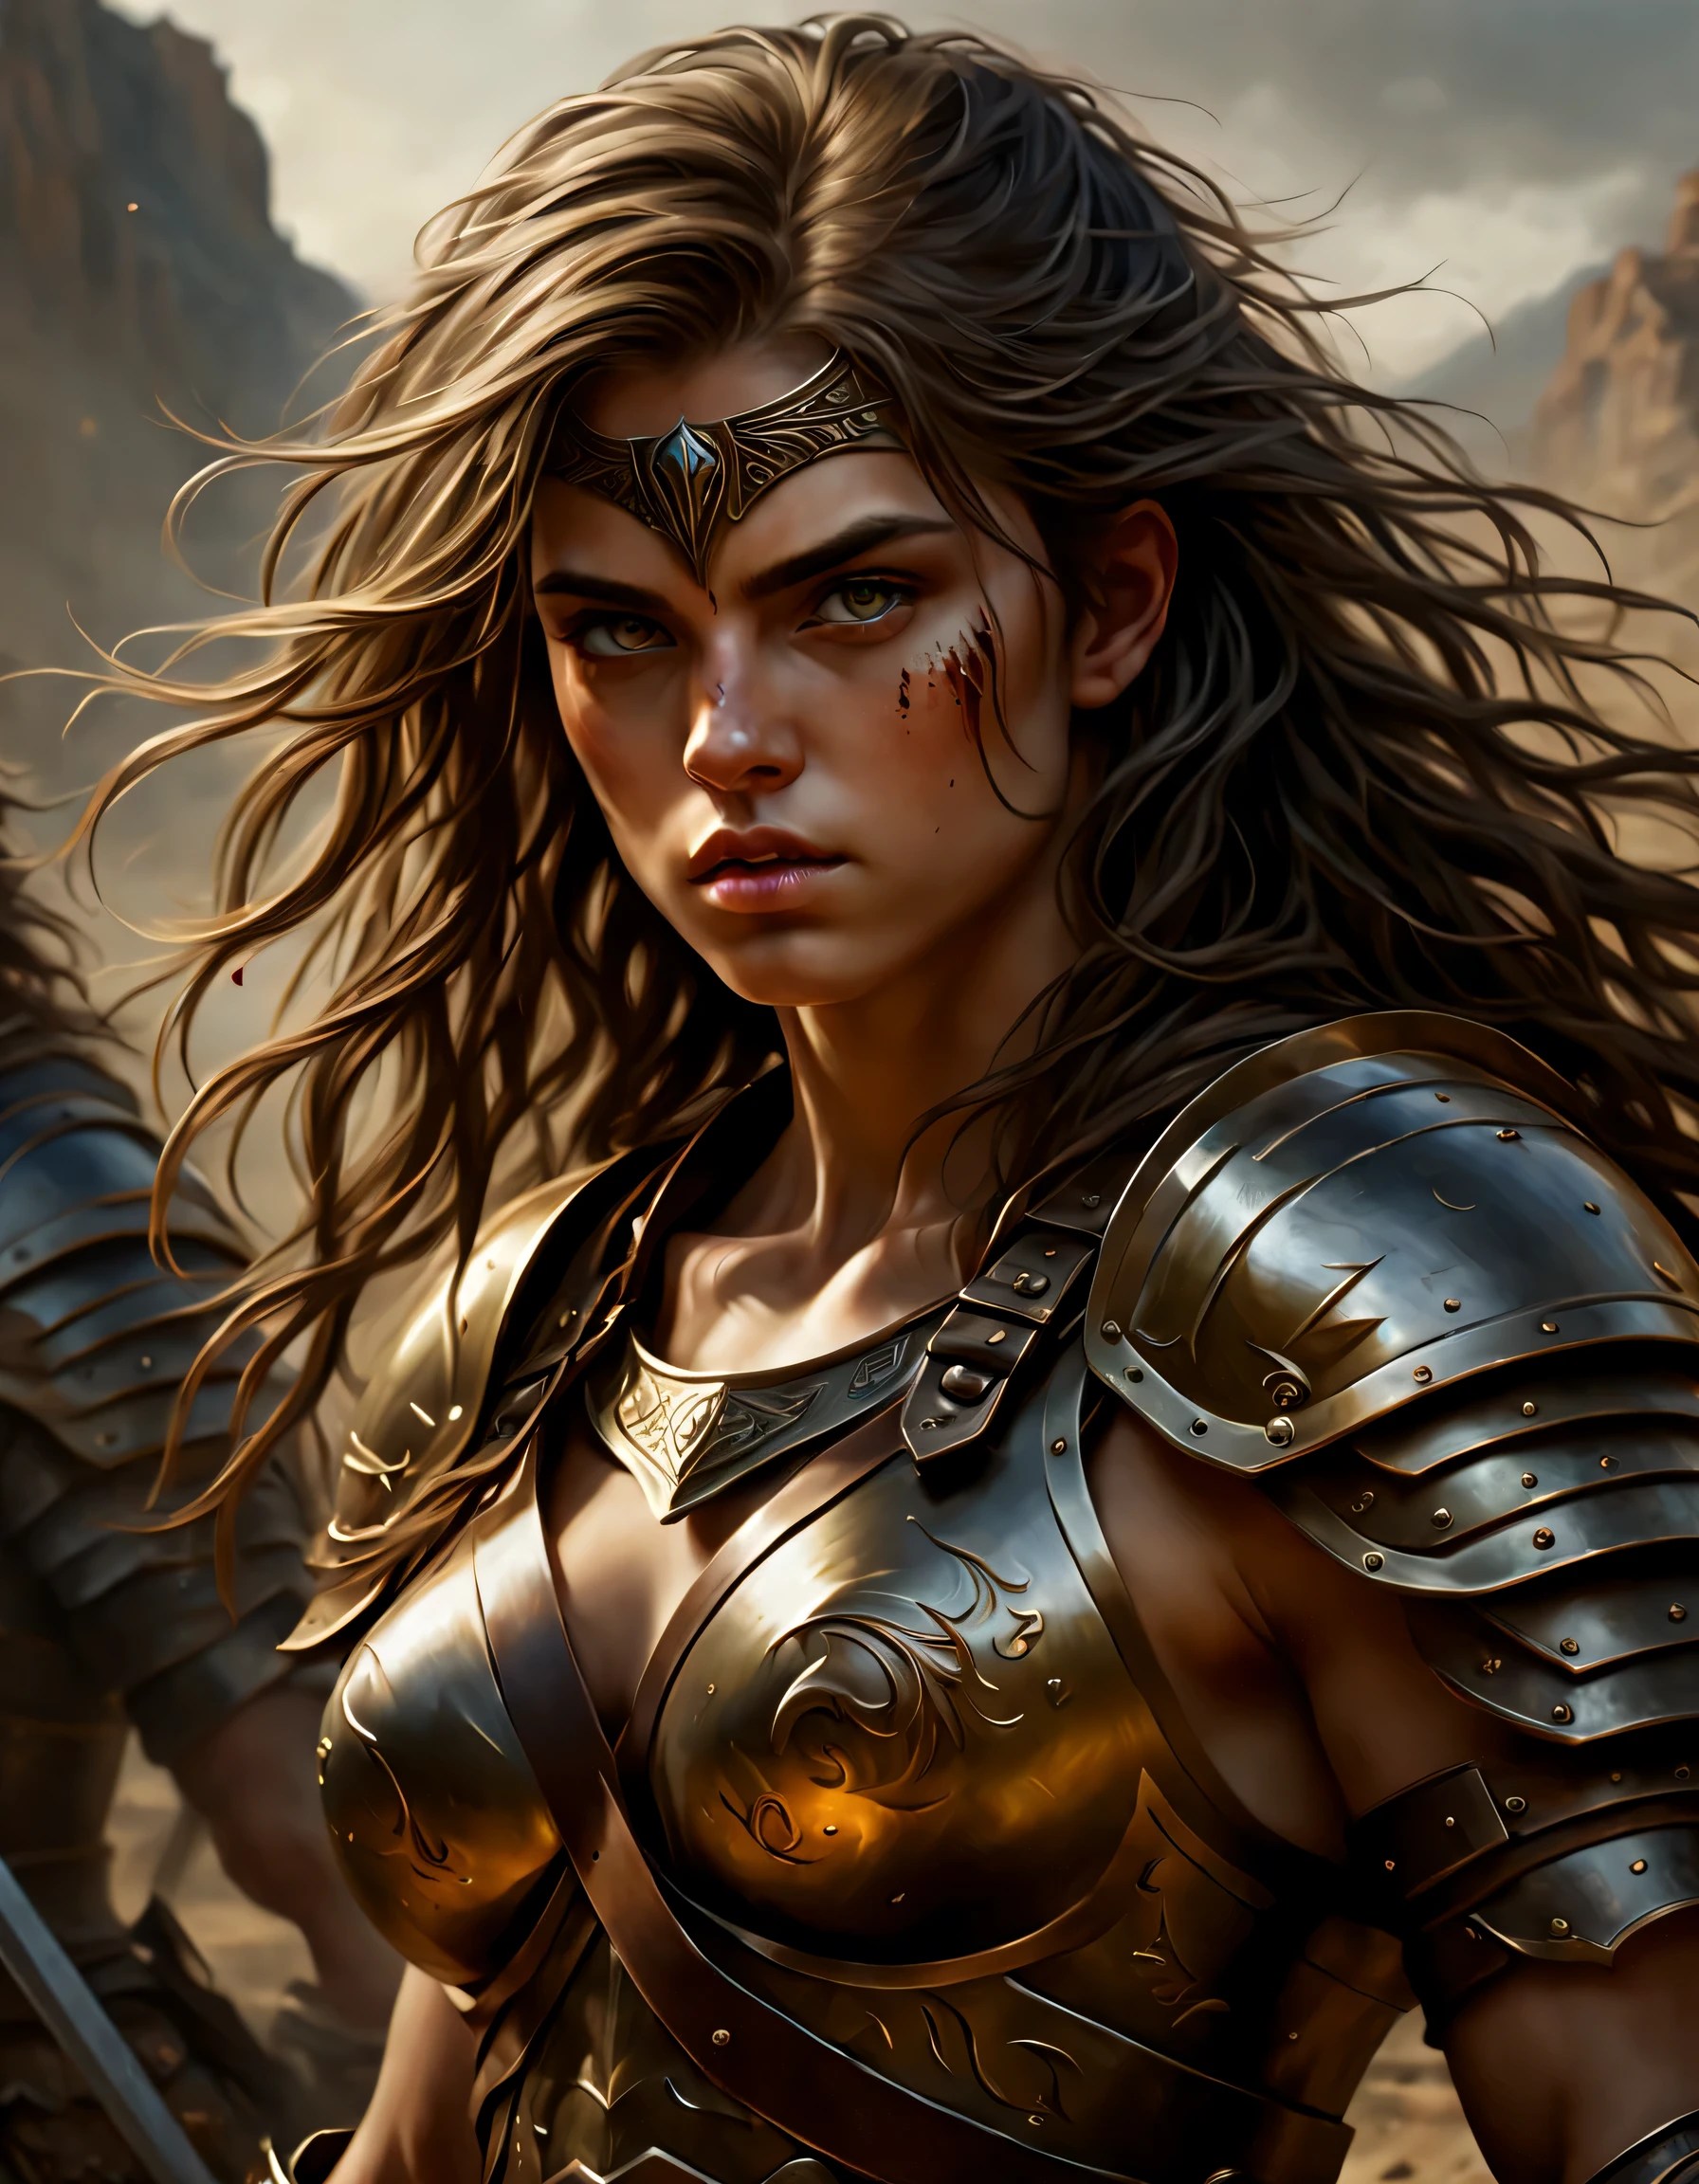 (best qualityer, high resolution, ultra detali, realisitic:1.37), dynamic lighting, oil painting, warrior, intense stare, strong and defined characteristics, loose hair, powerful and confident posture, dramatic shadows, swirly vibrant colors, complex armor with metallic details, epic battle scene, post apocalyptic landscape, spooky ambiance, Fantasyart, long or short abelos, Brava face, dark kingdom, pose sexy, fantastic landscape, adult fantasy